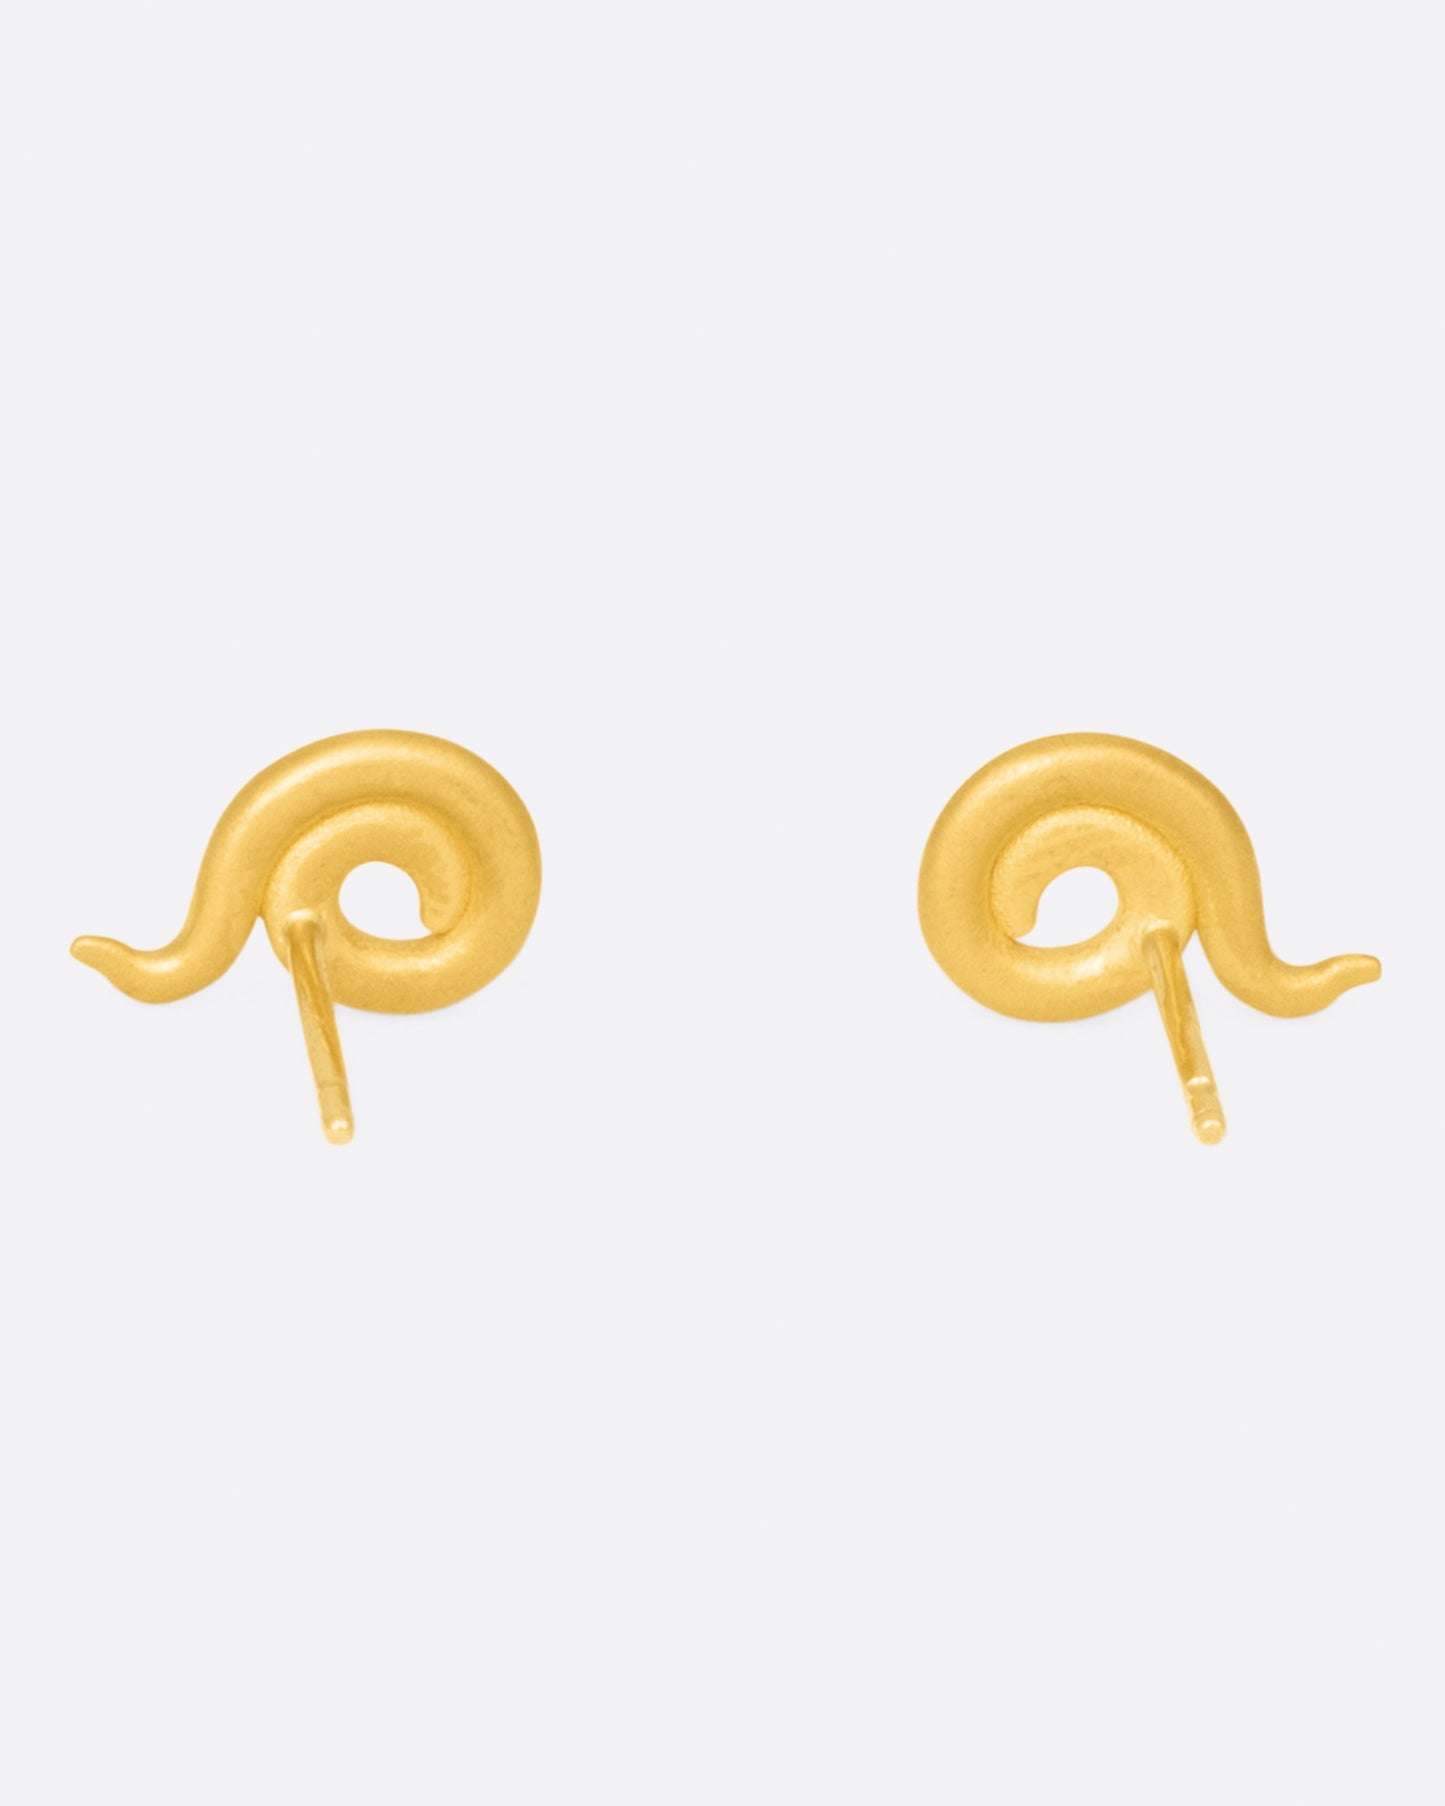 A pair of coiled 22k yellow gold stud earrings, shown from the back.